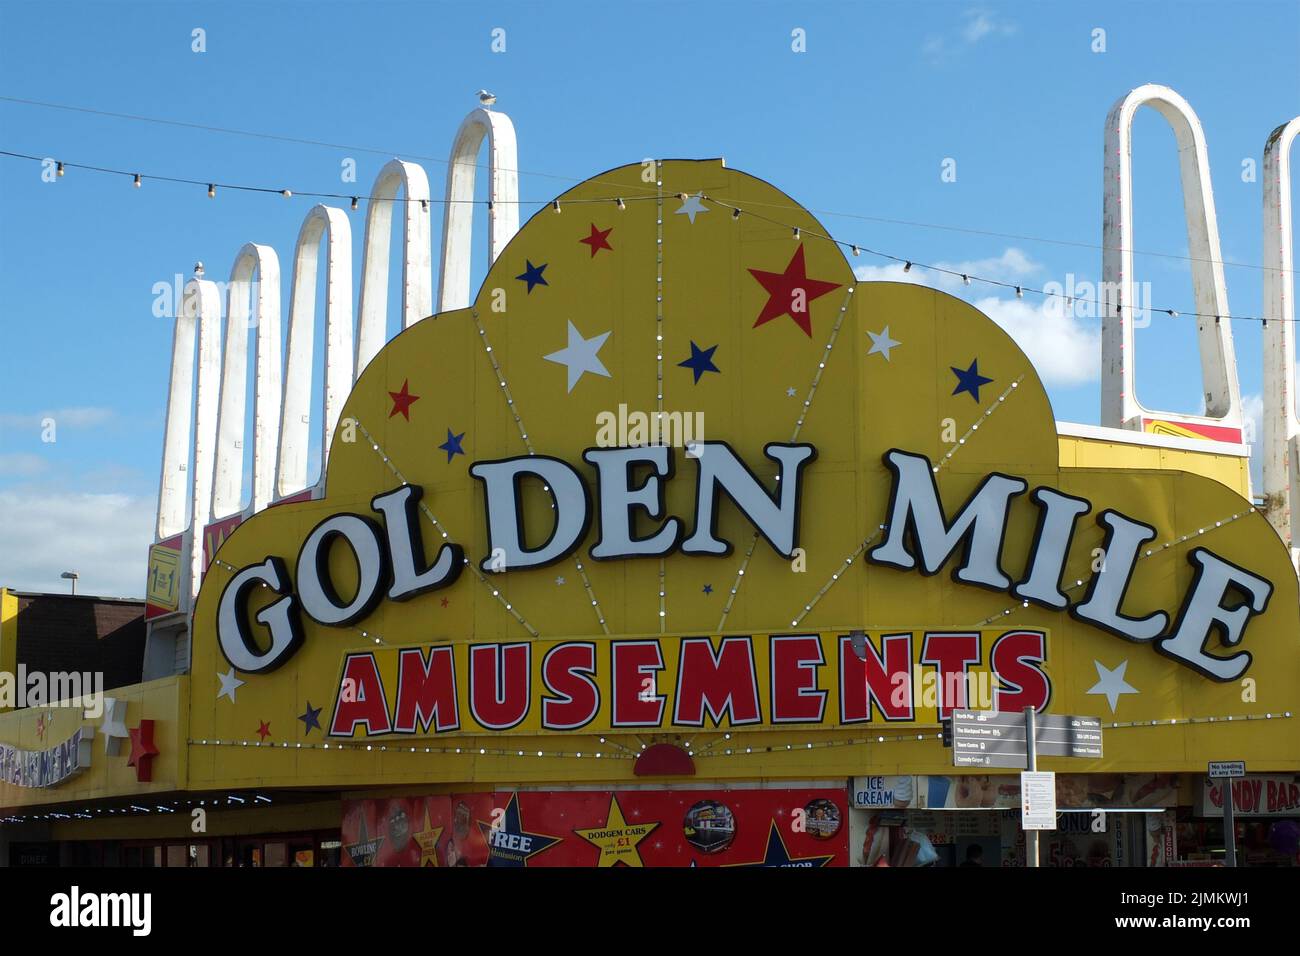 Sign above the golden mile amusement arcade in blackpool Stock Photo